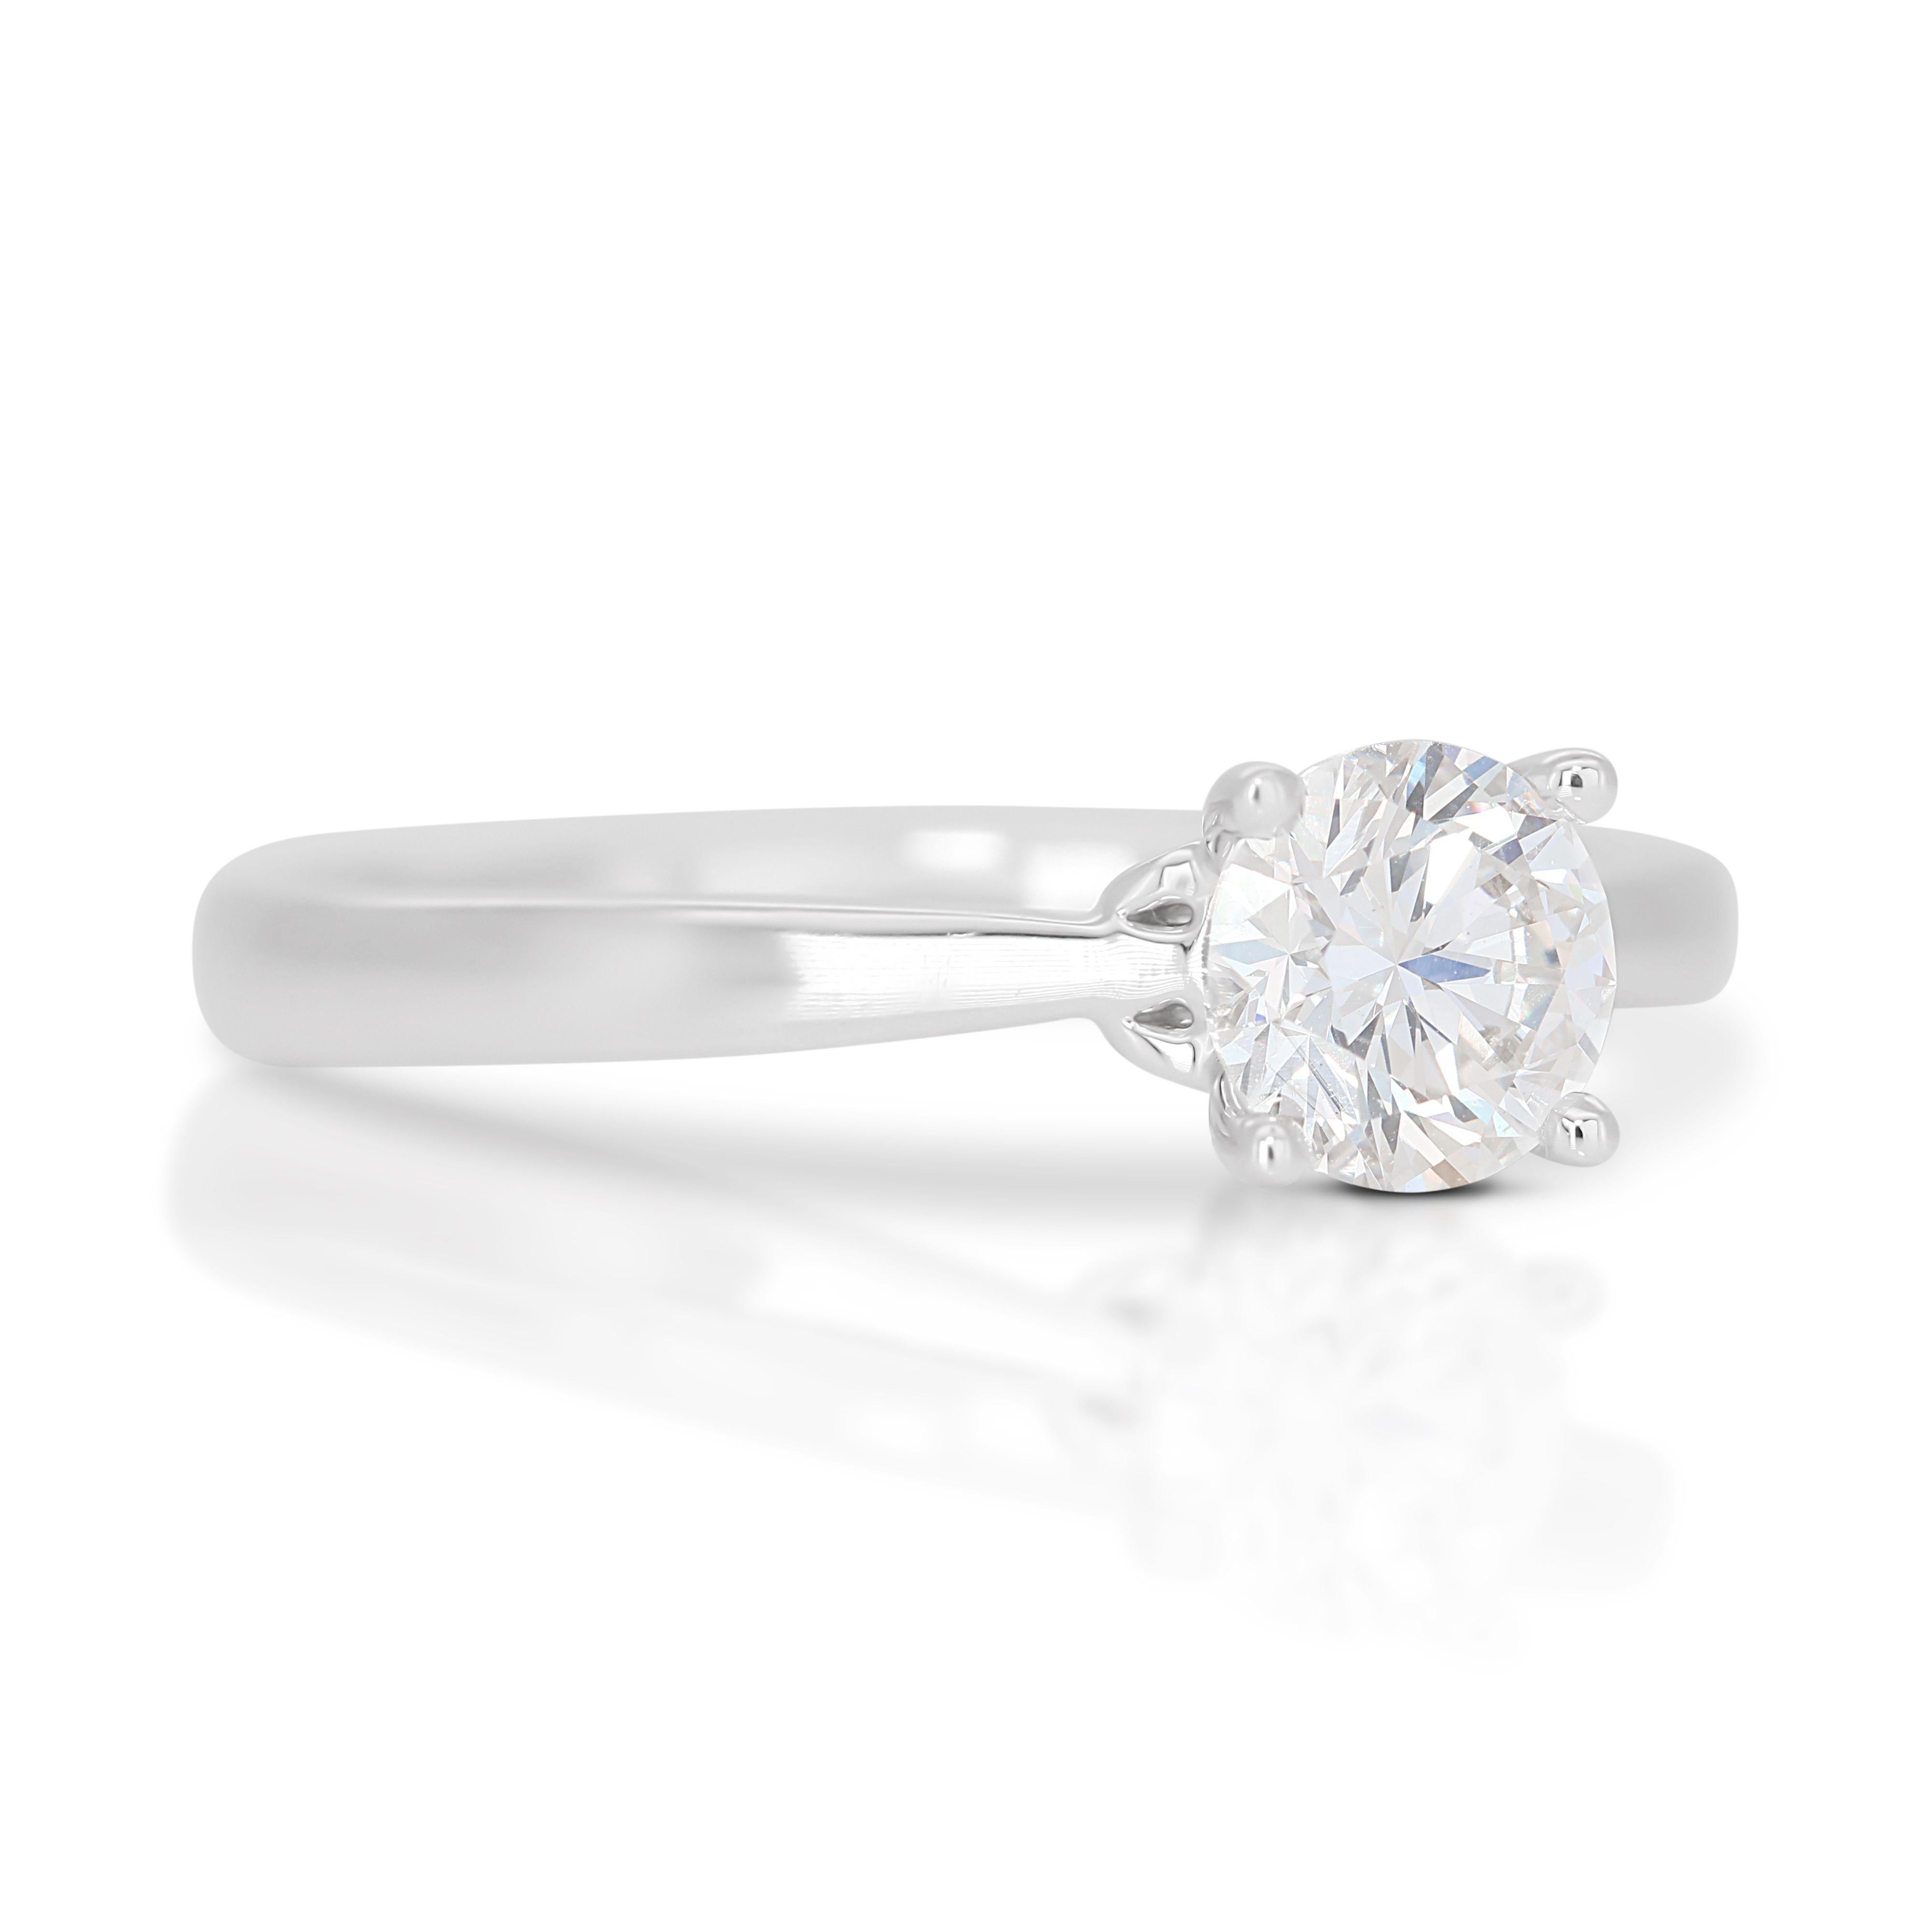 Captivating 0.55ct Diamond Solitaire Ring in 18K White Gold In New Condition For Sale In רמת גן, IL